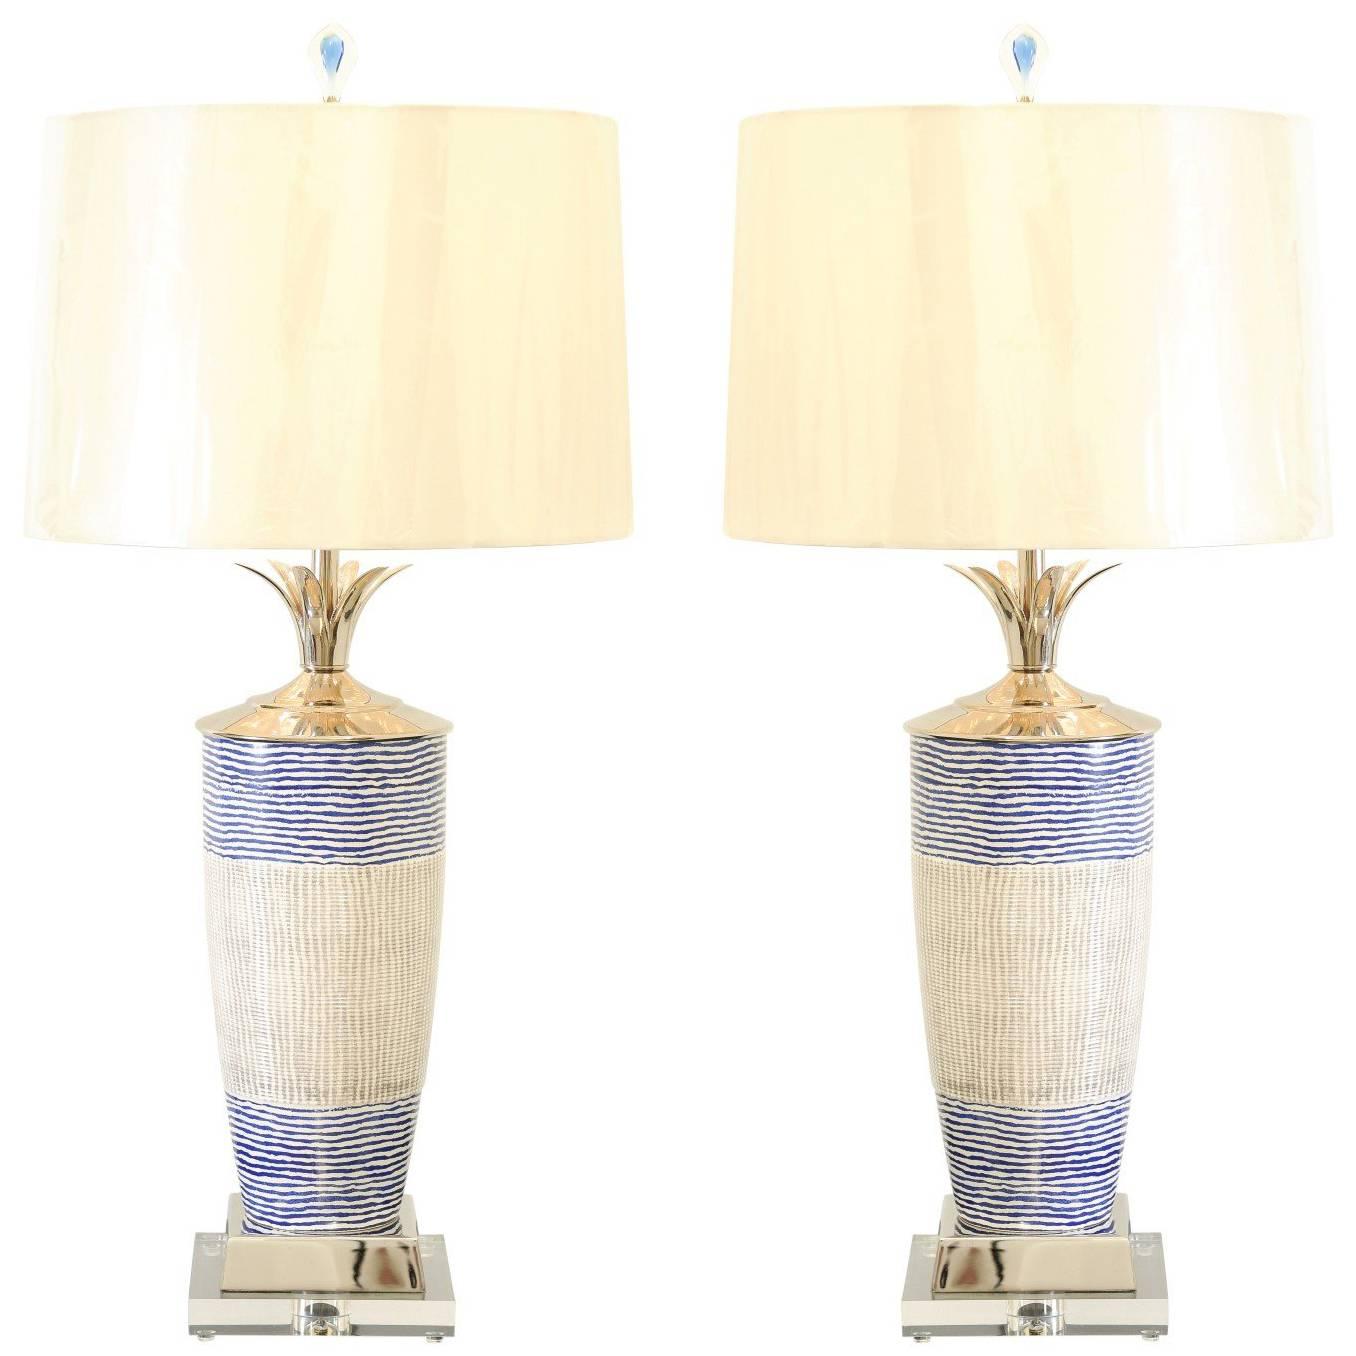 Exquisite Pair of Handmade Portuguese Ceramic Vessels as New Custom Lamps For Sale